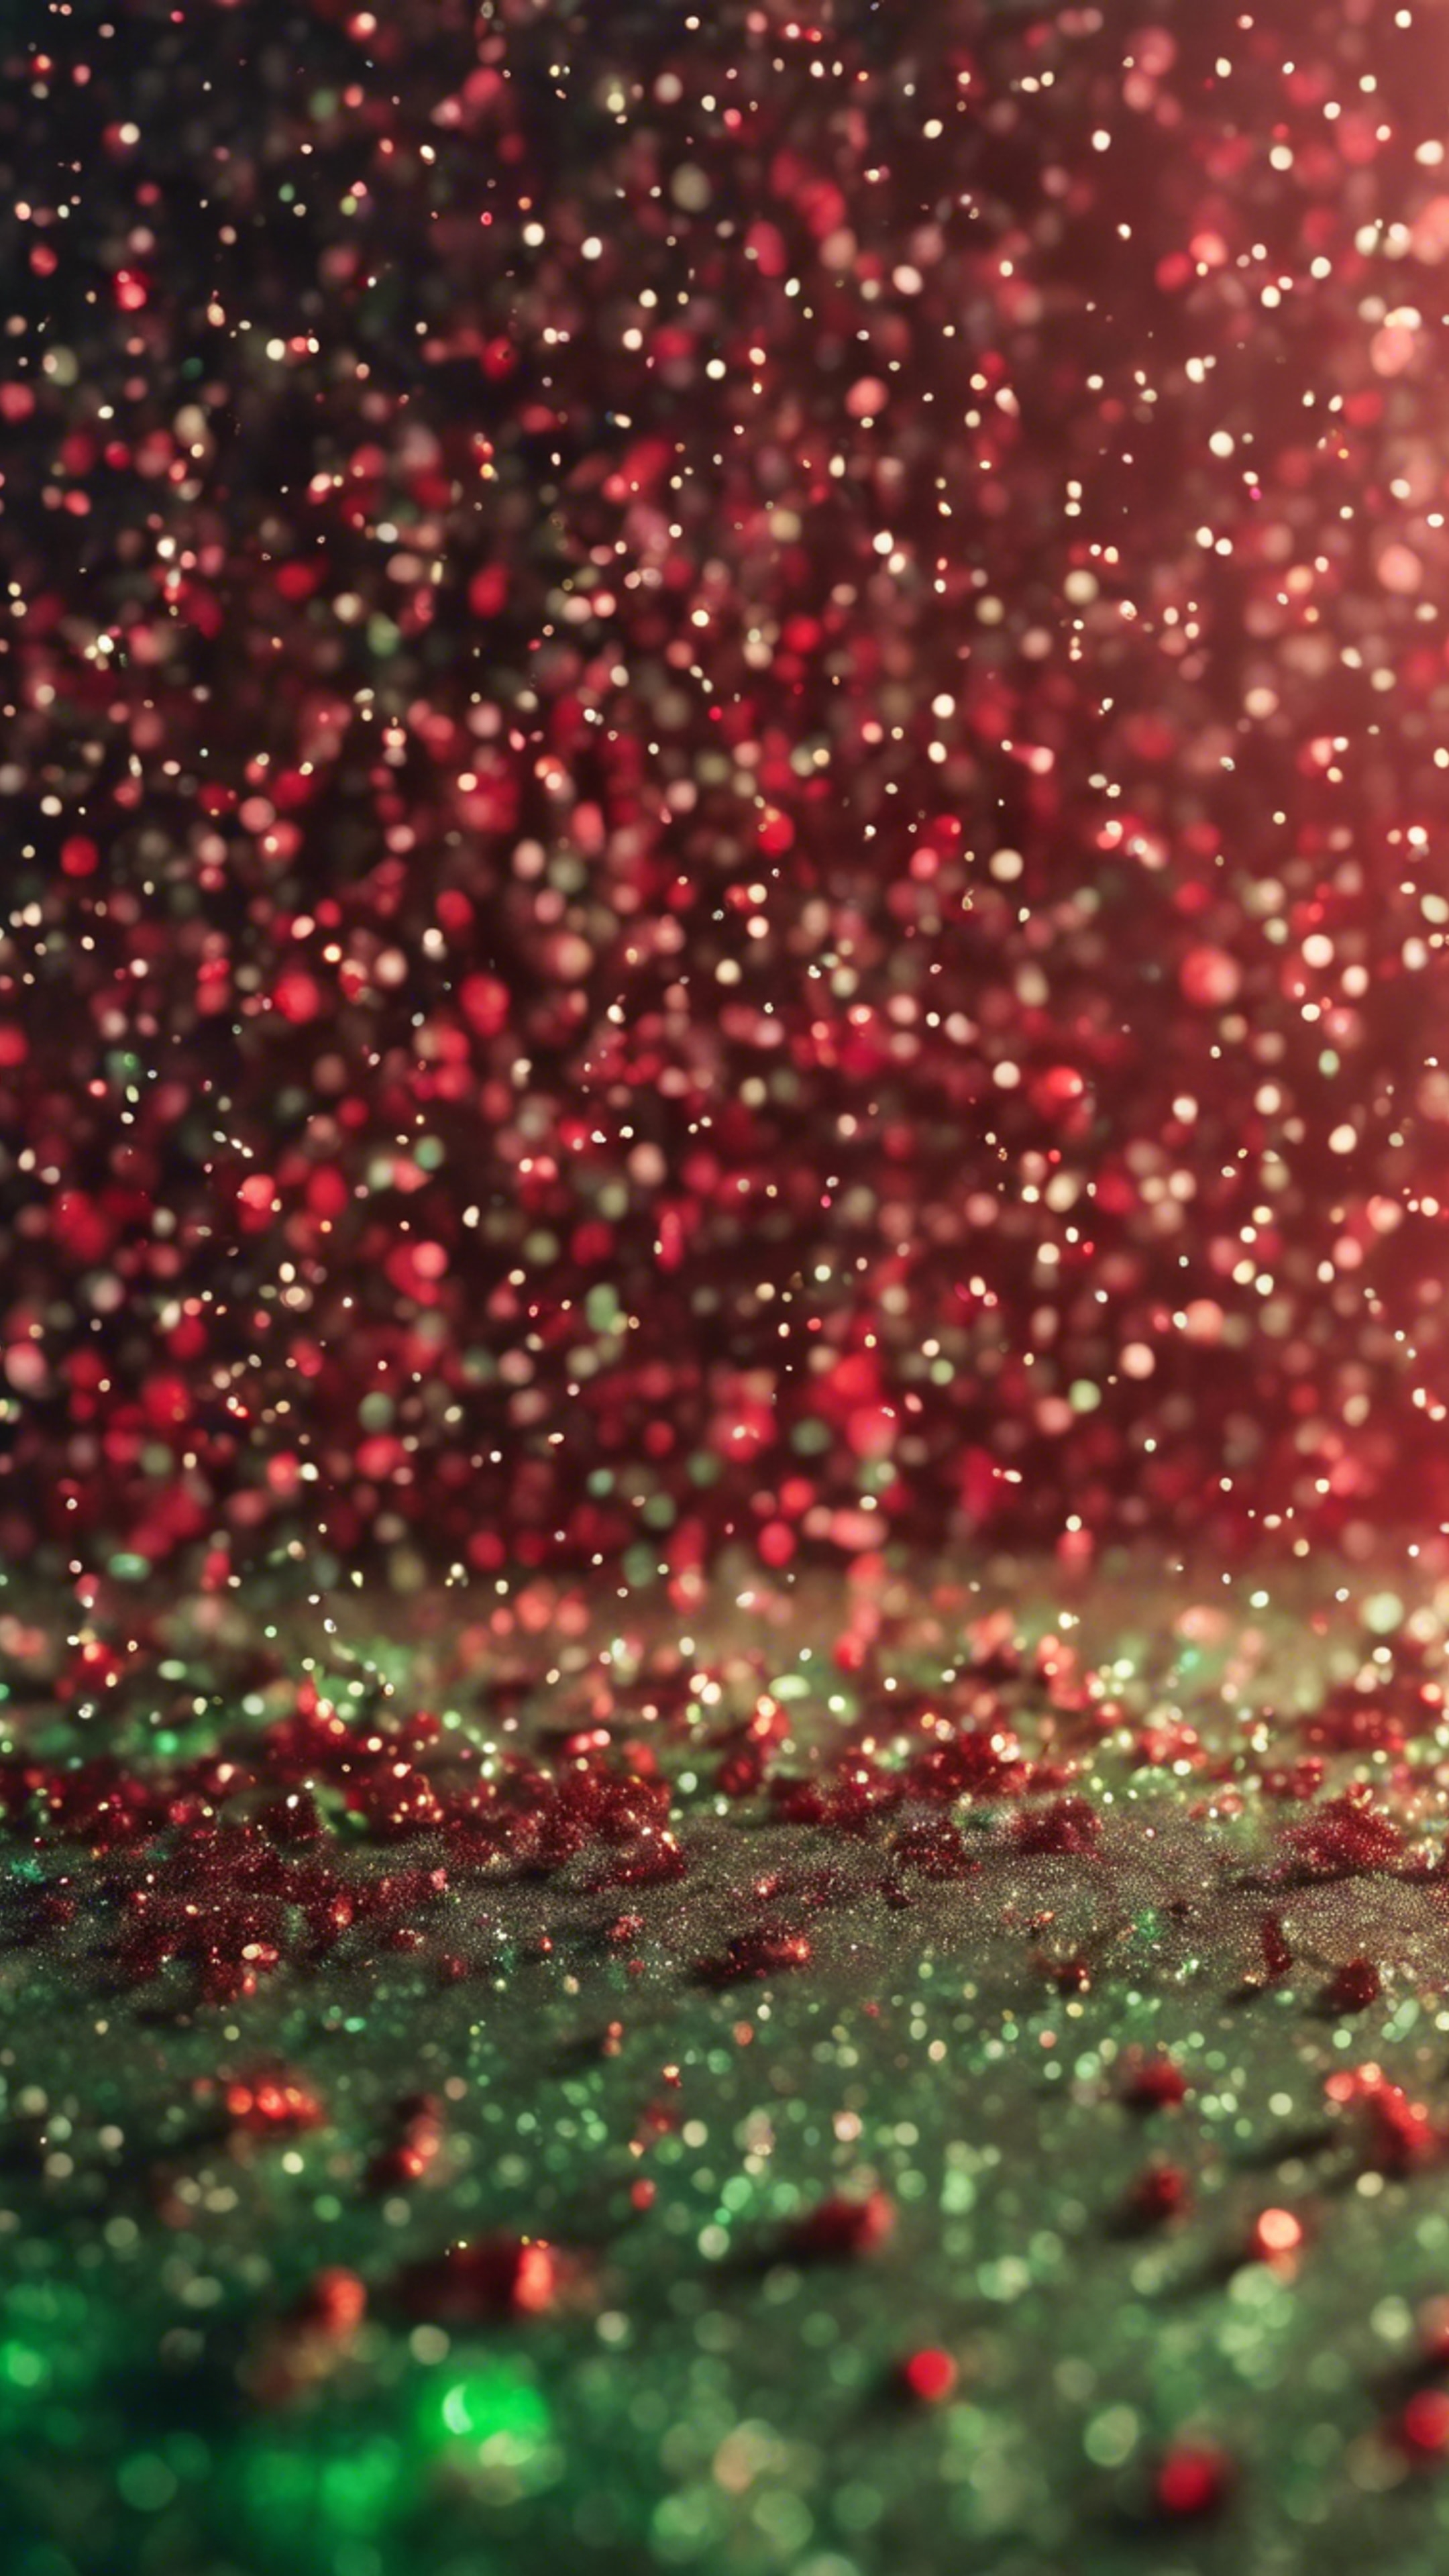 Tiny green and red glitter particles scattered randomly Tapeta[e9e8f5a2023d489ba4c1]